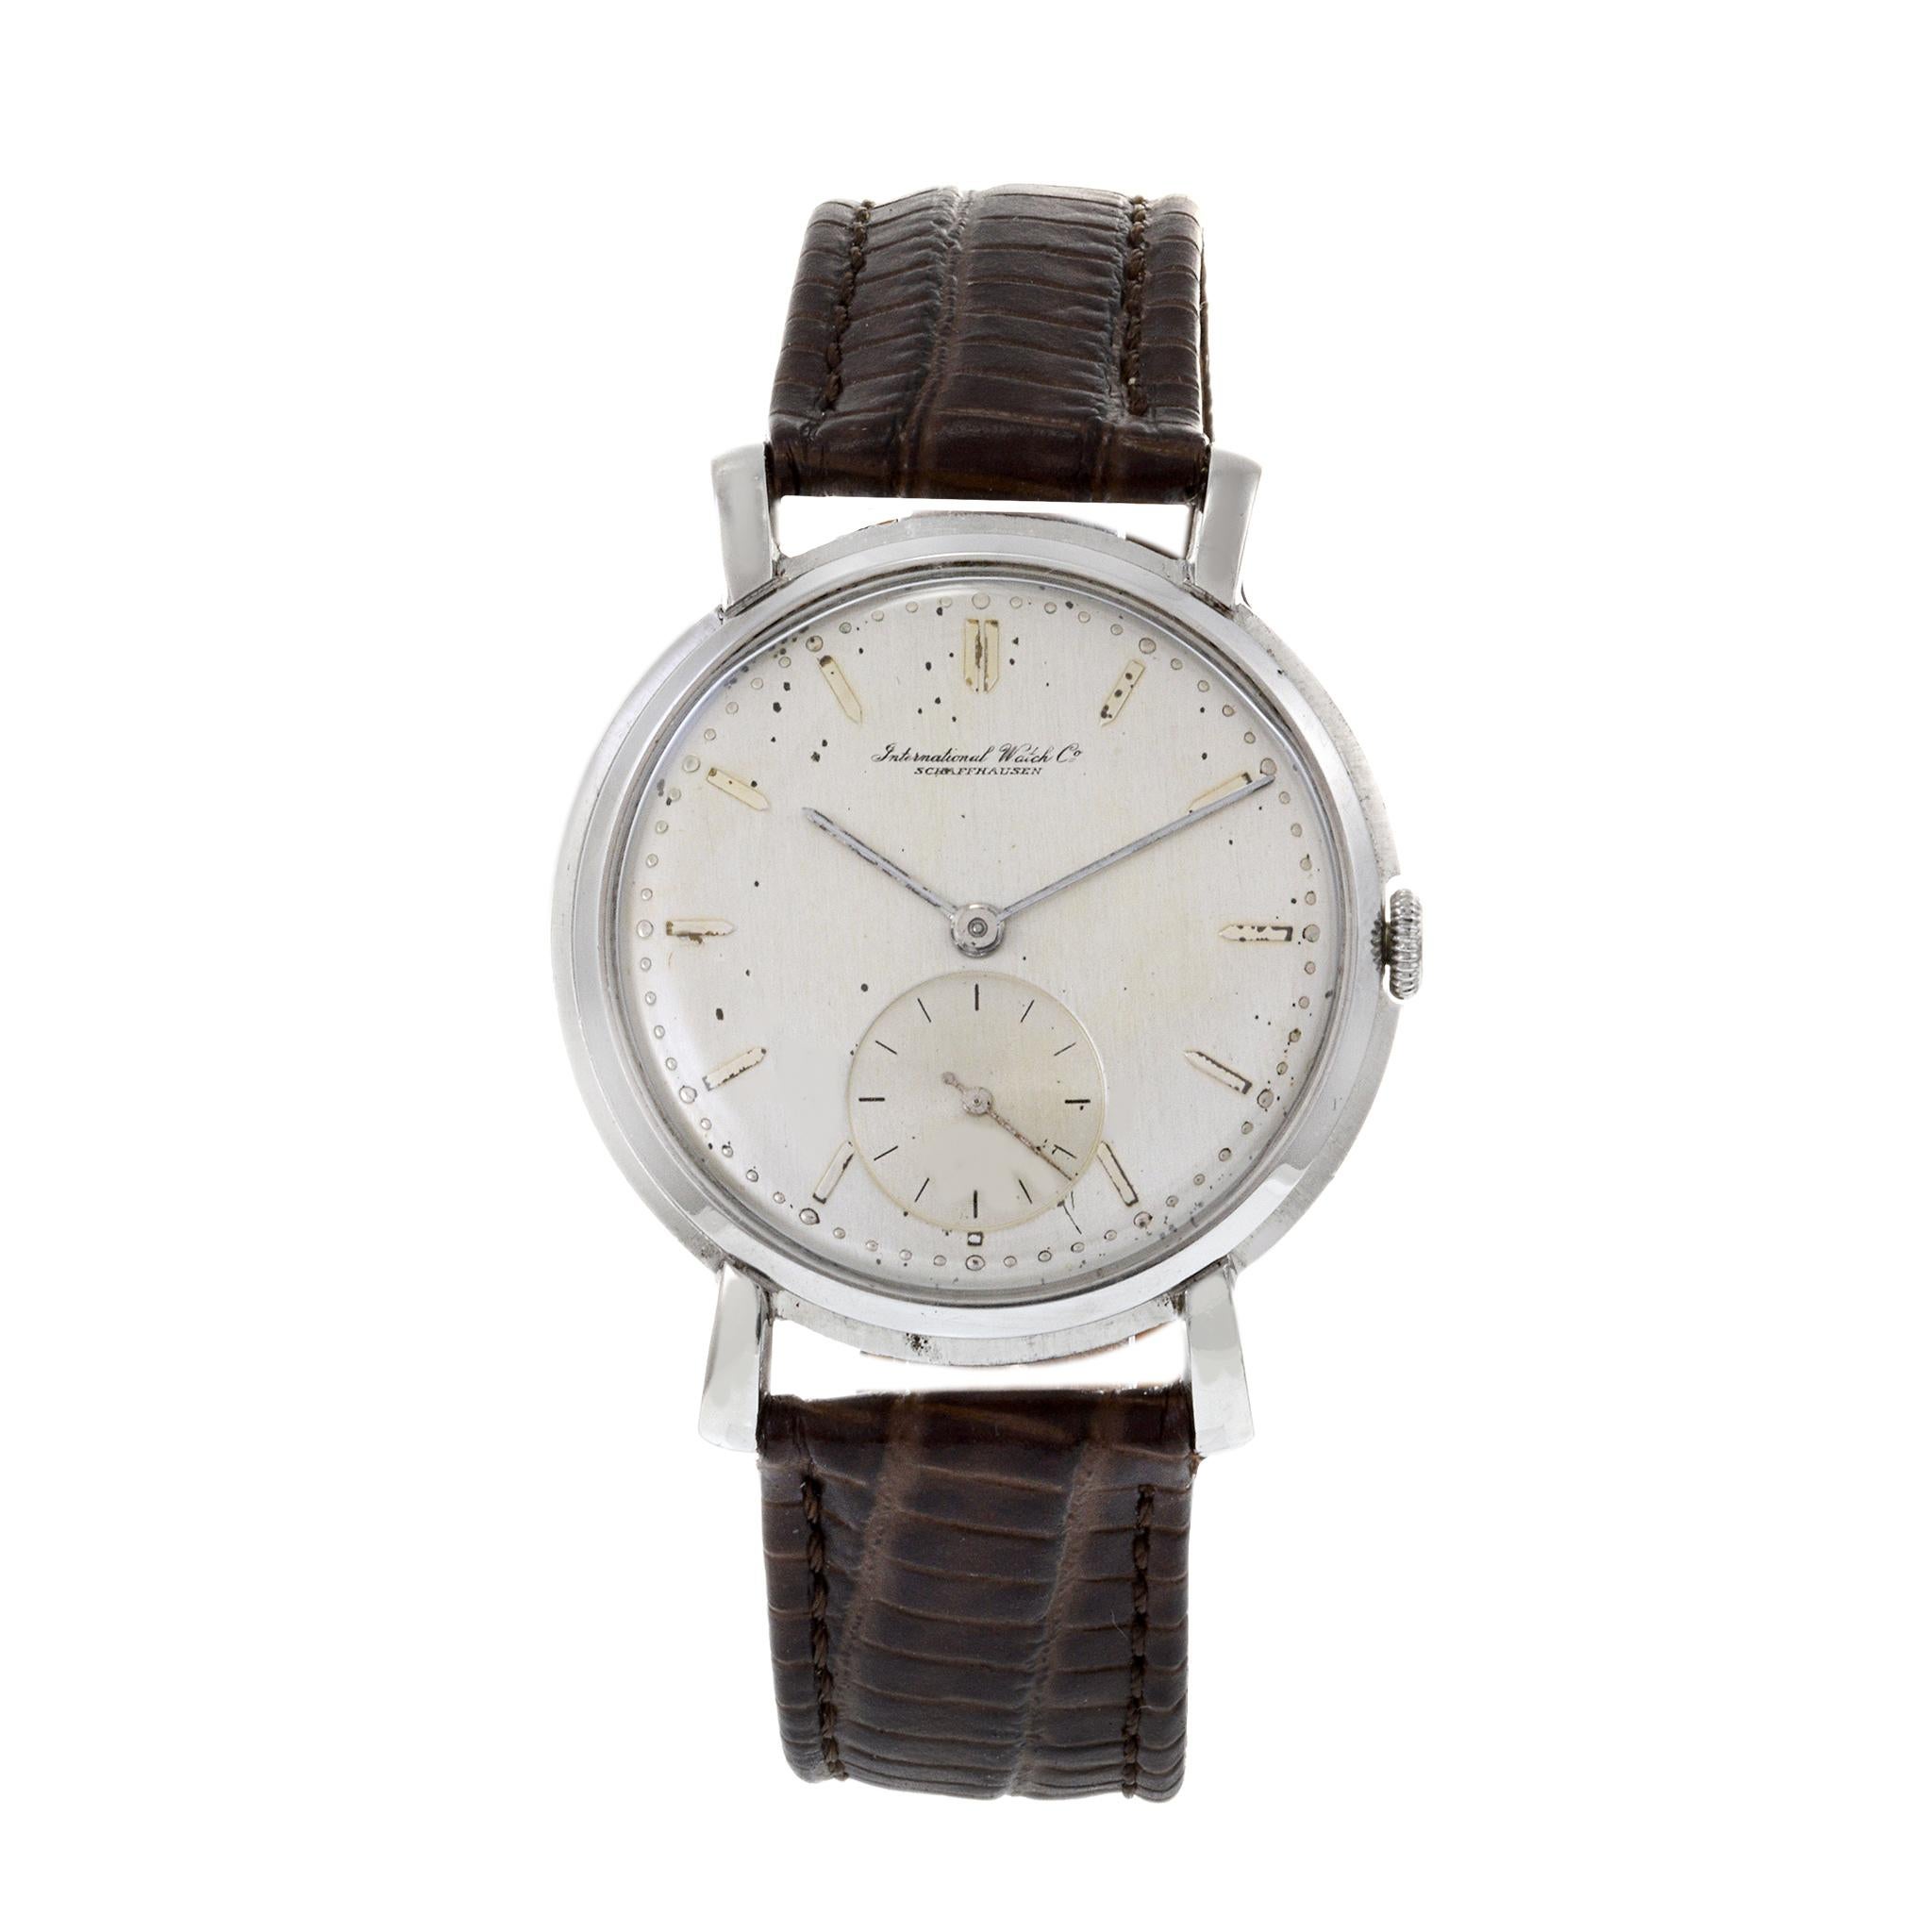 This is an iconic 1950's IWC caliber 88 manual wind Calatrava. The watch was considered jumbo size for the decade at 36mm considering that most watches were under 32mm in size. This watch features flared lugs and the a sub second dial at 6 o'clock.